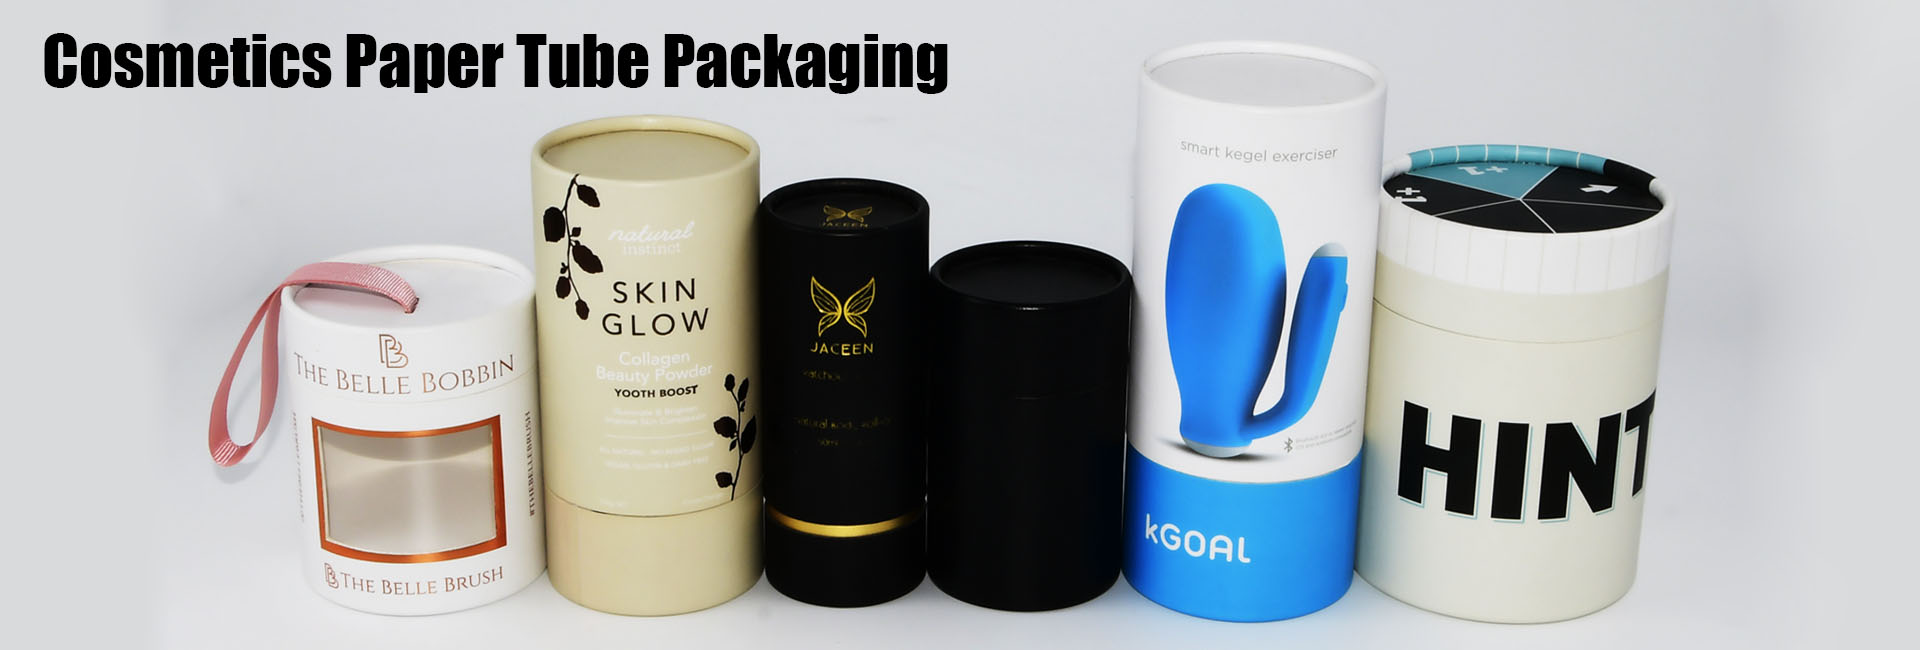 Cosmetics Paper Tube Packaging 